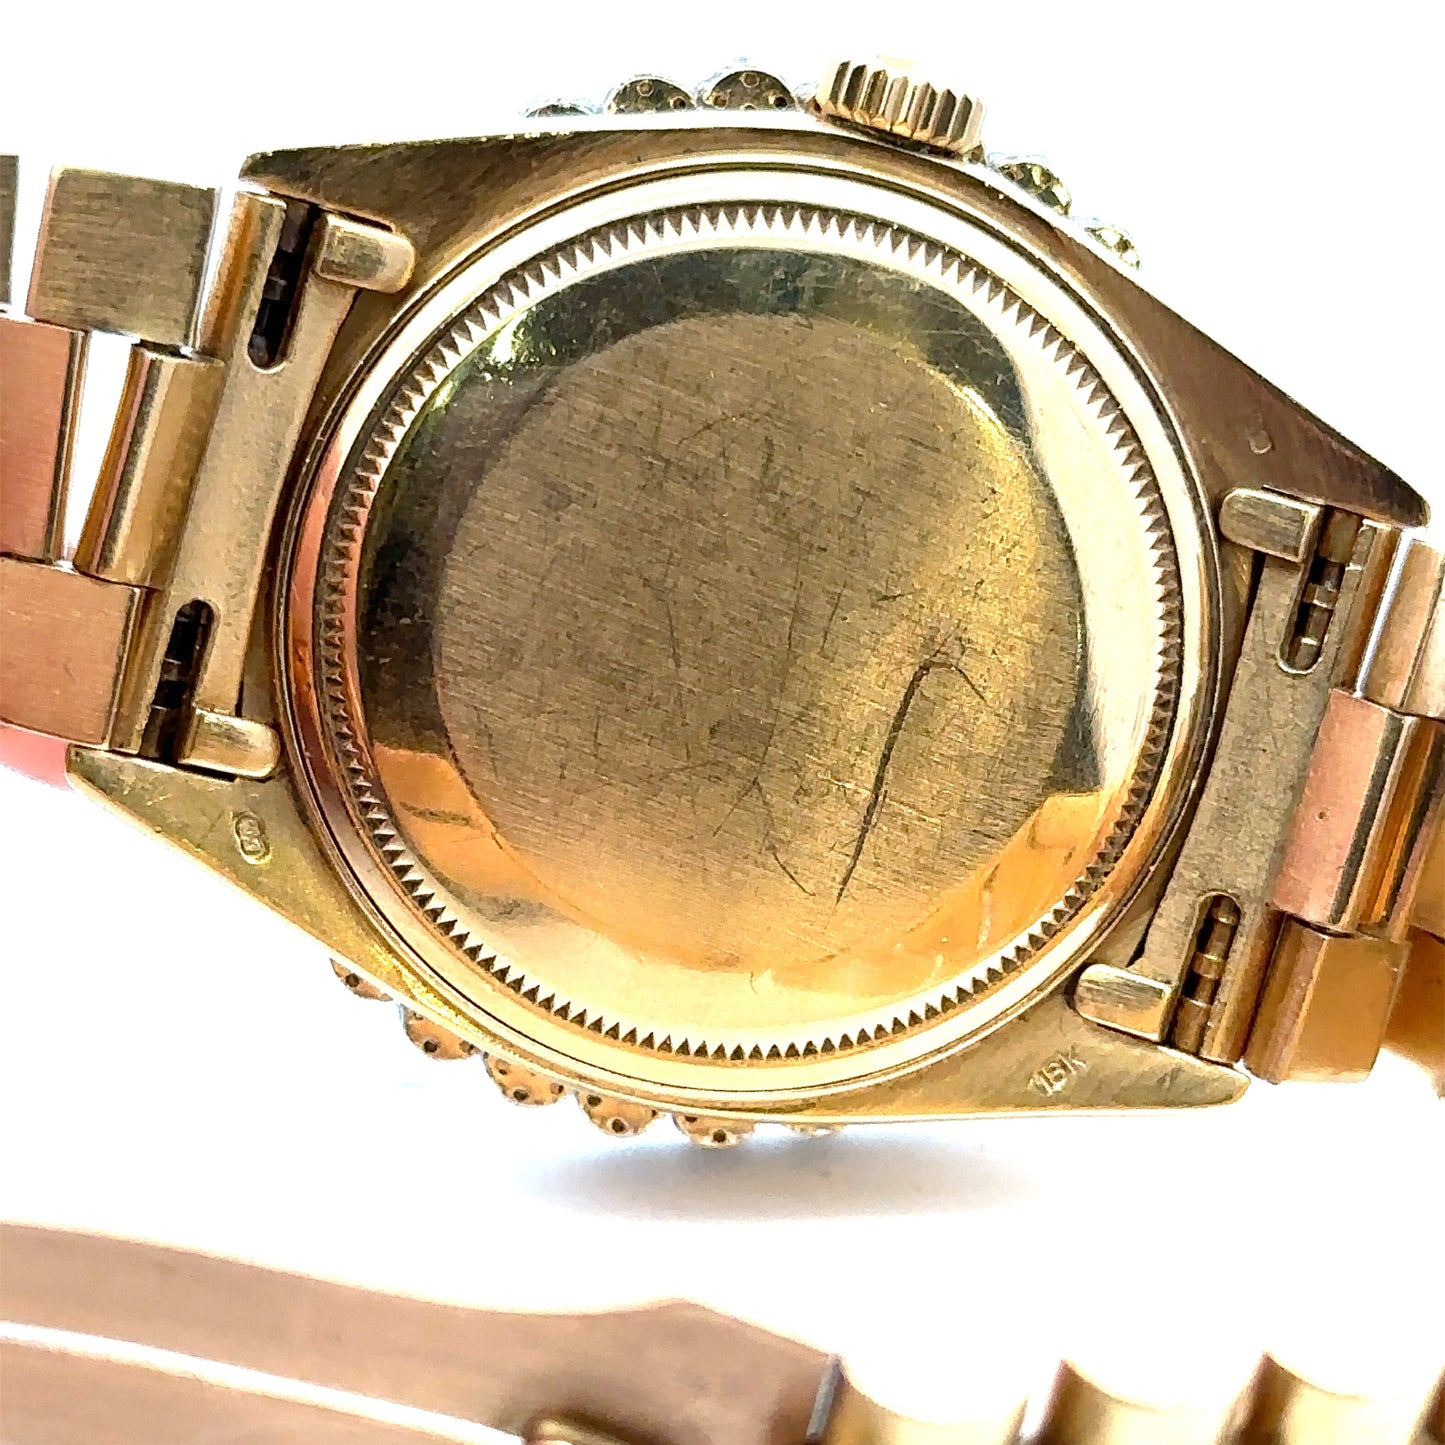 Back of Rolex case with scratches